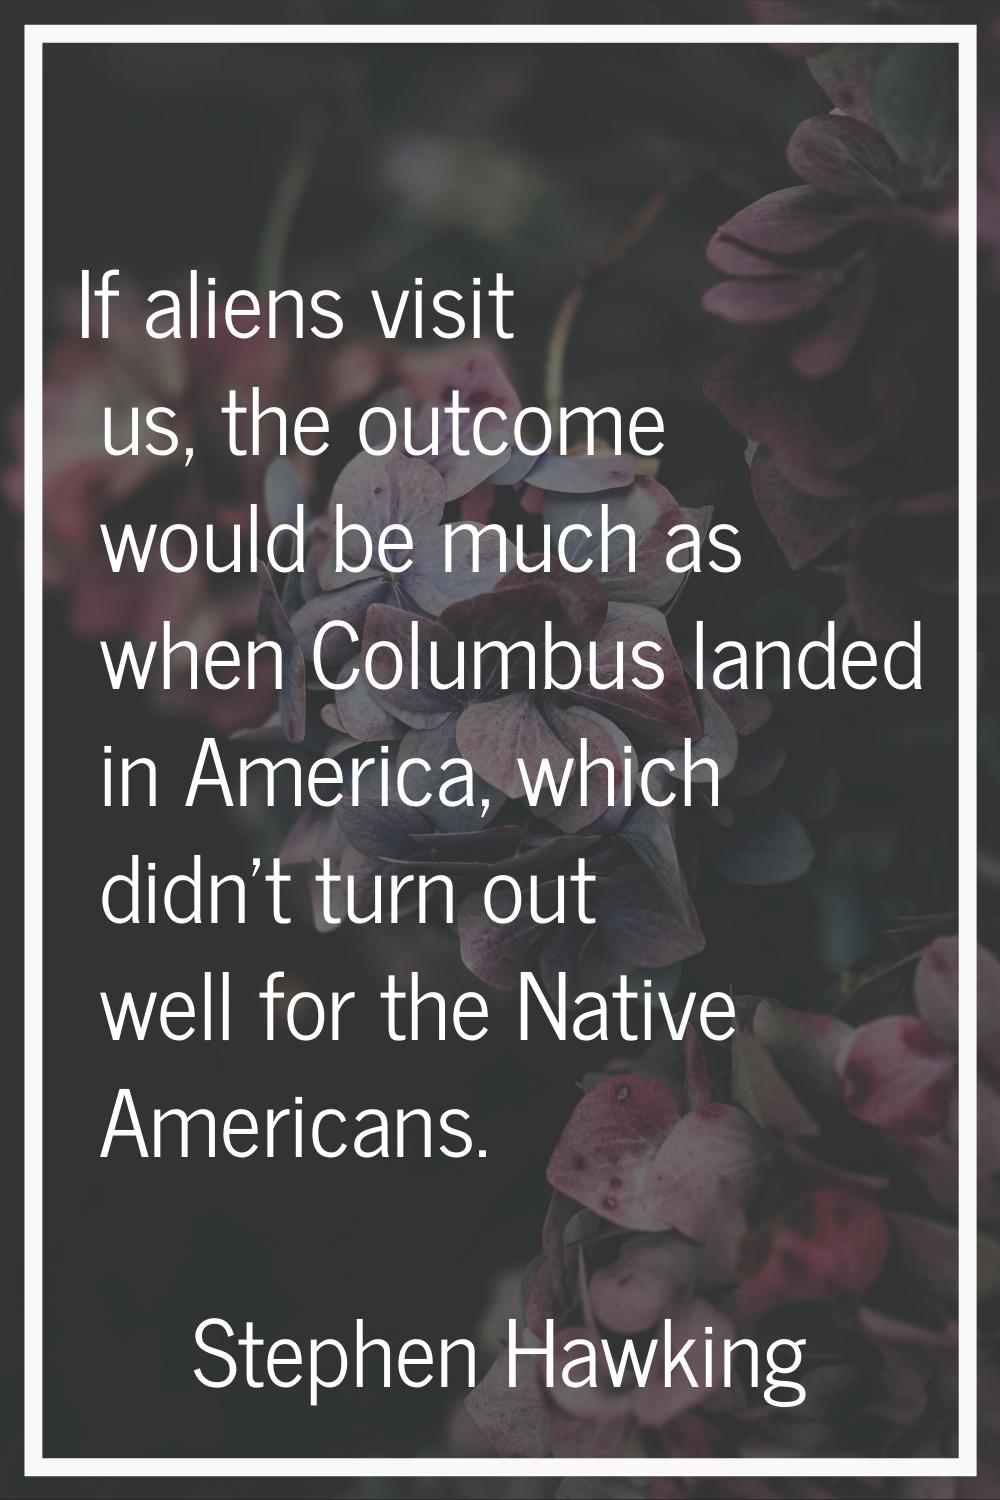 If aliens visit us, the outcome would be much as when Columbus landed in America, which didn't turn